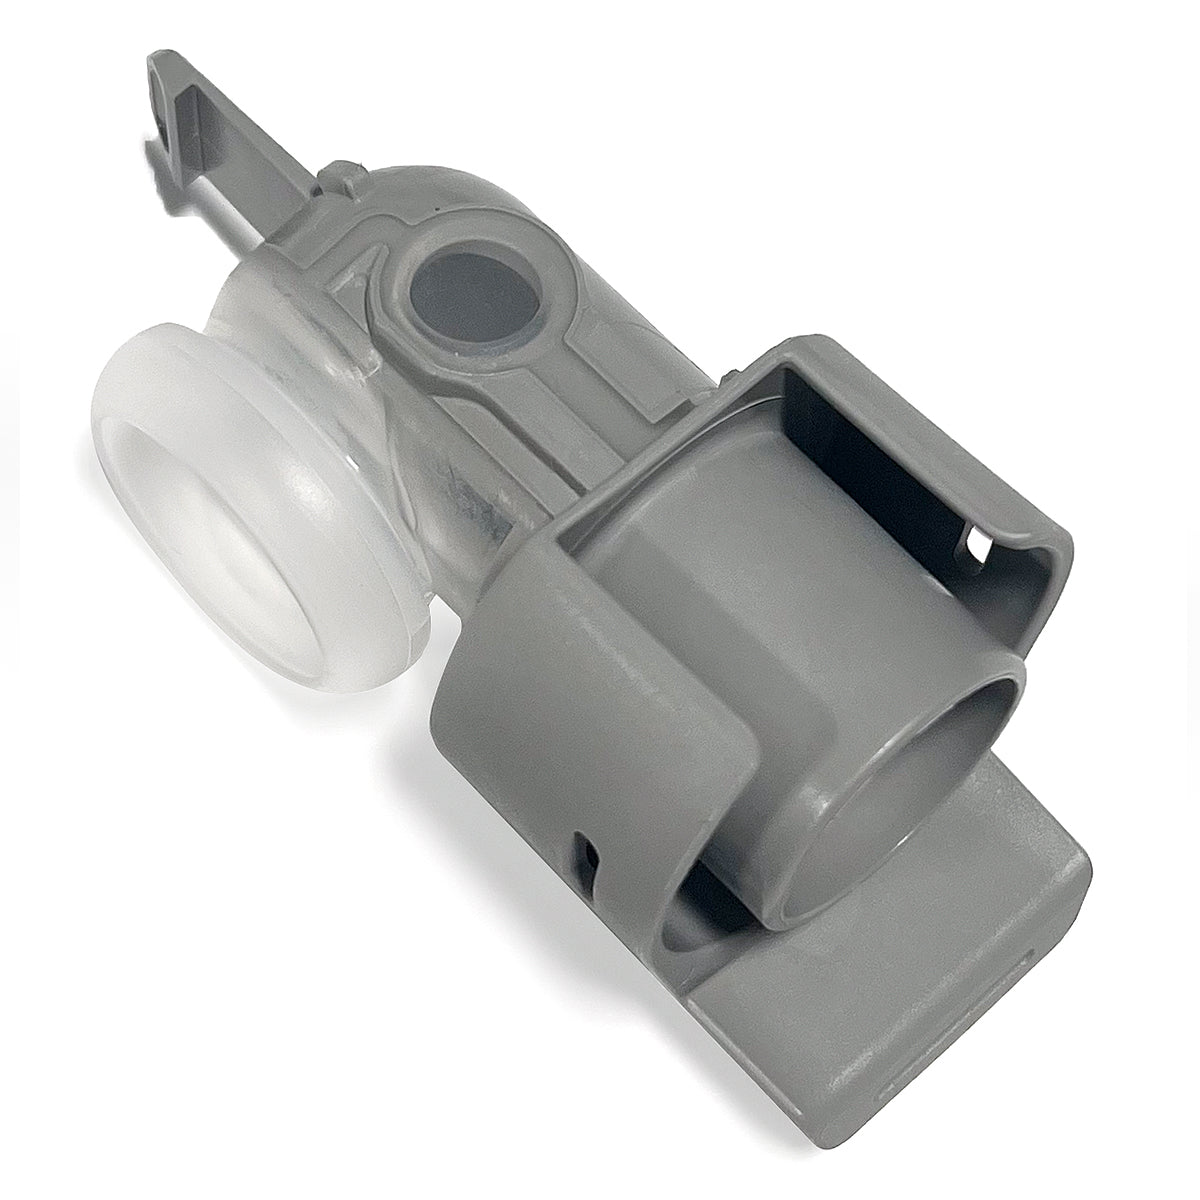 ResMed Air Outlet Adapter for AirSense 10, AirStart 10 & AirCurve 10 Machines